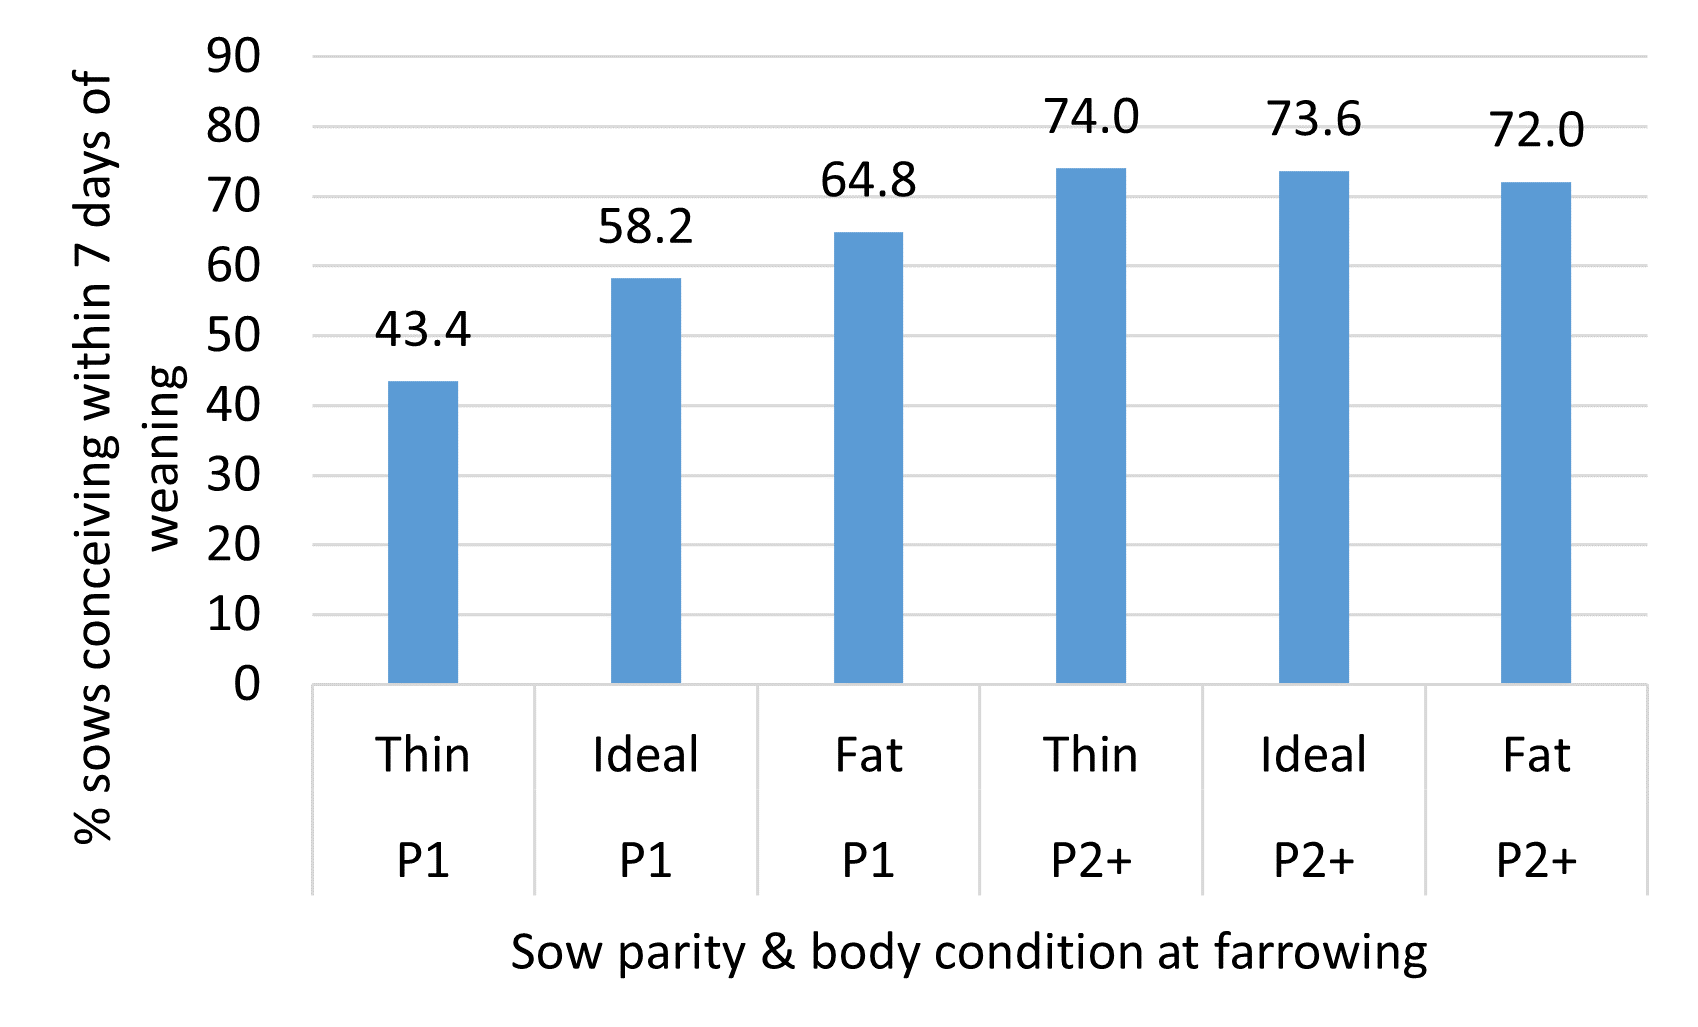 Impact of parity and prefarrow body condition score on the % of sow conceiving